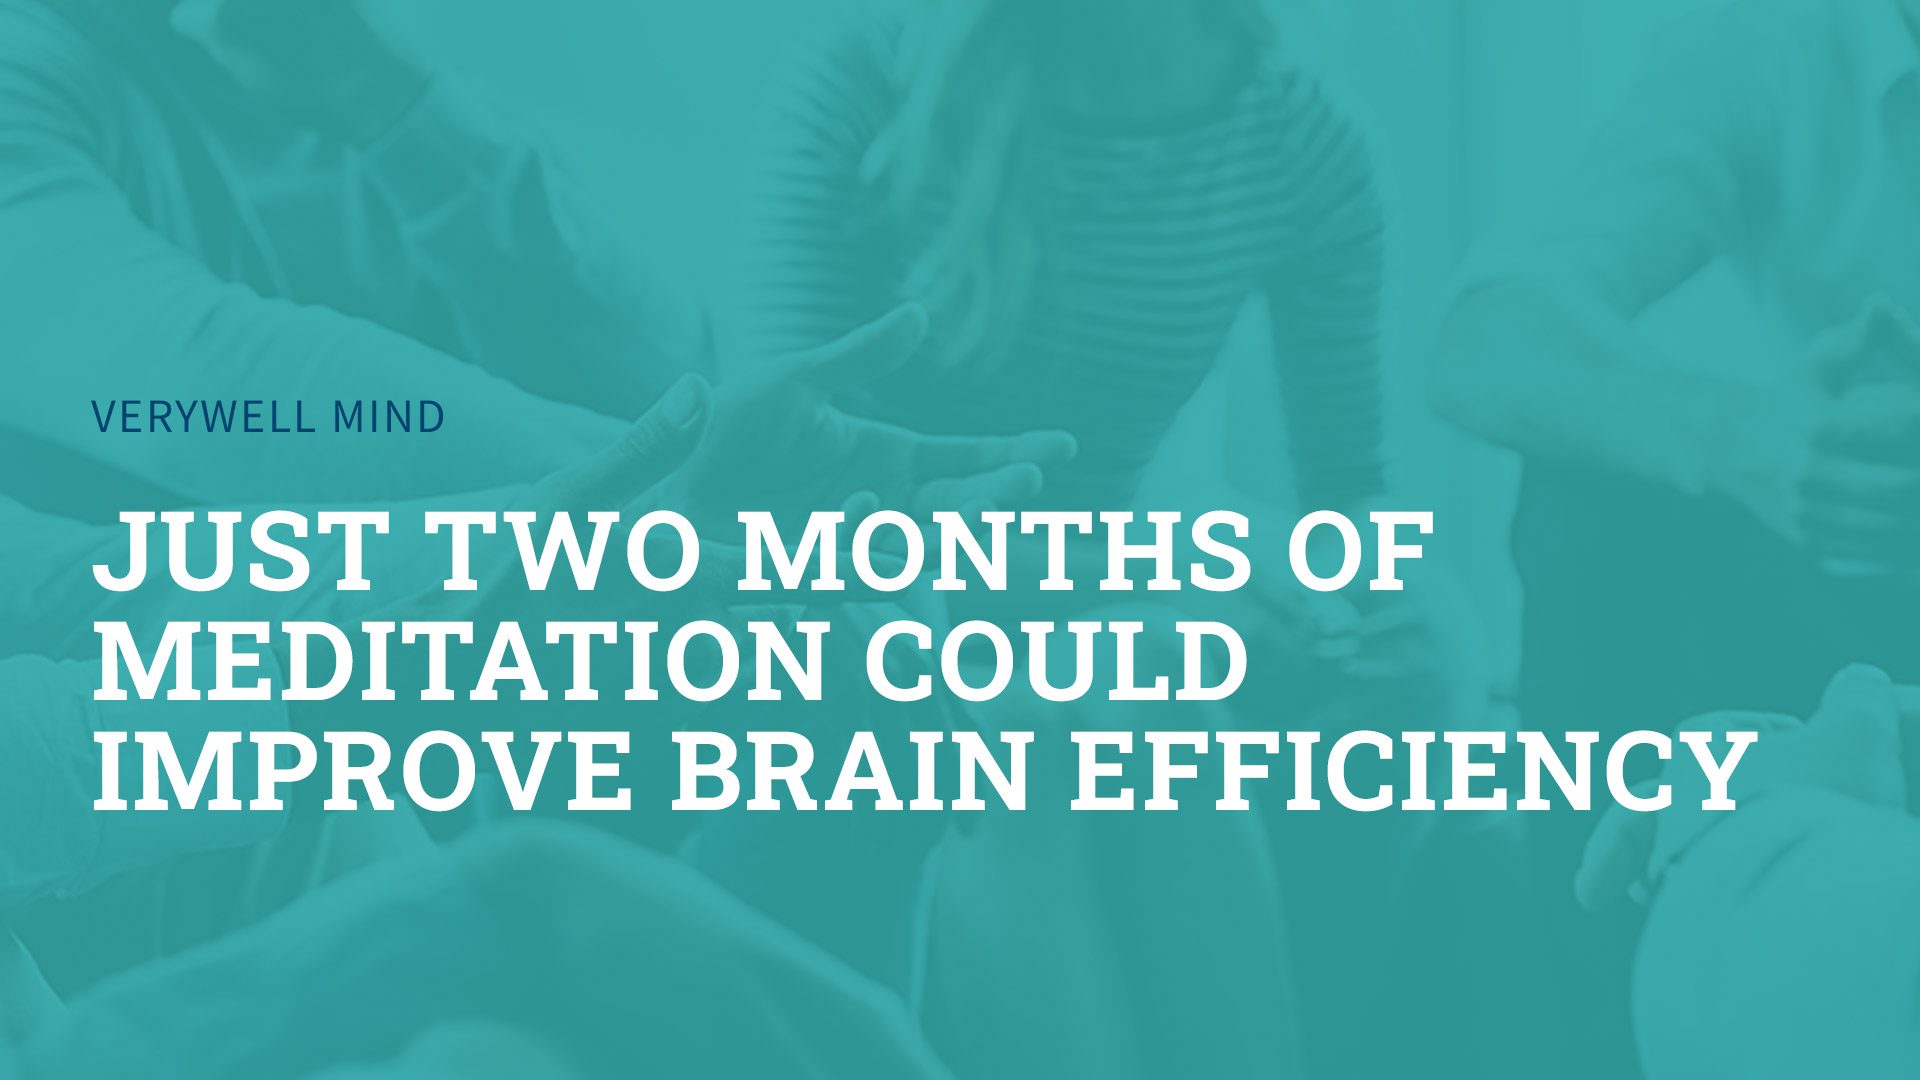 Just Two Months of Meditation Could Improve Brain Efficiency